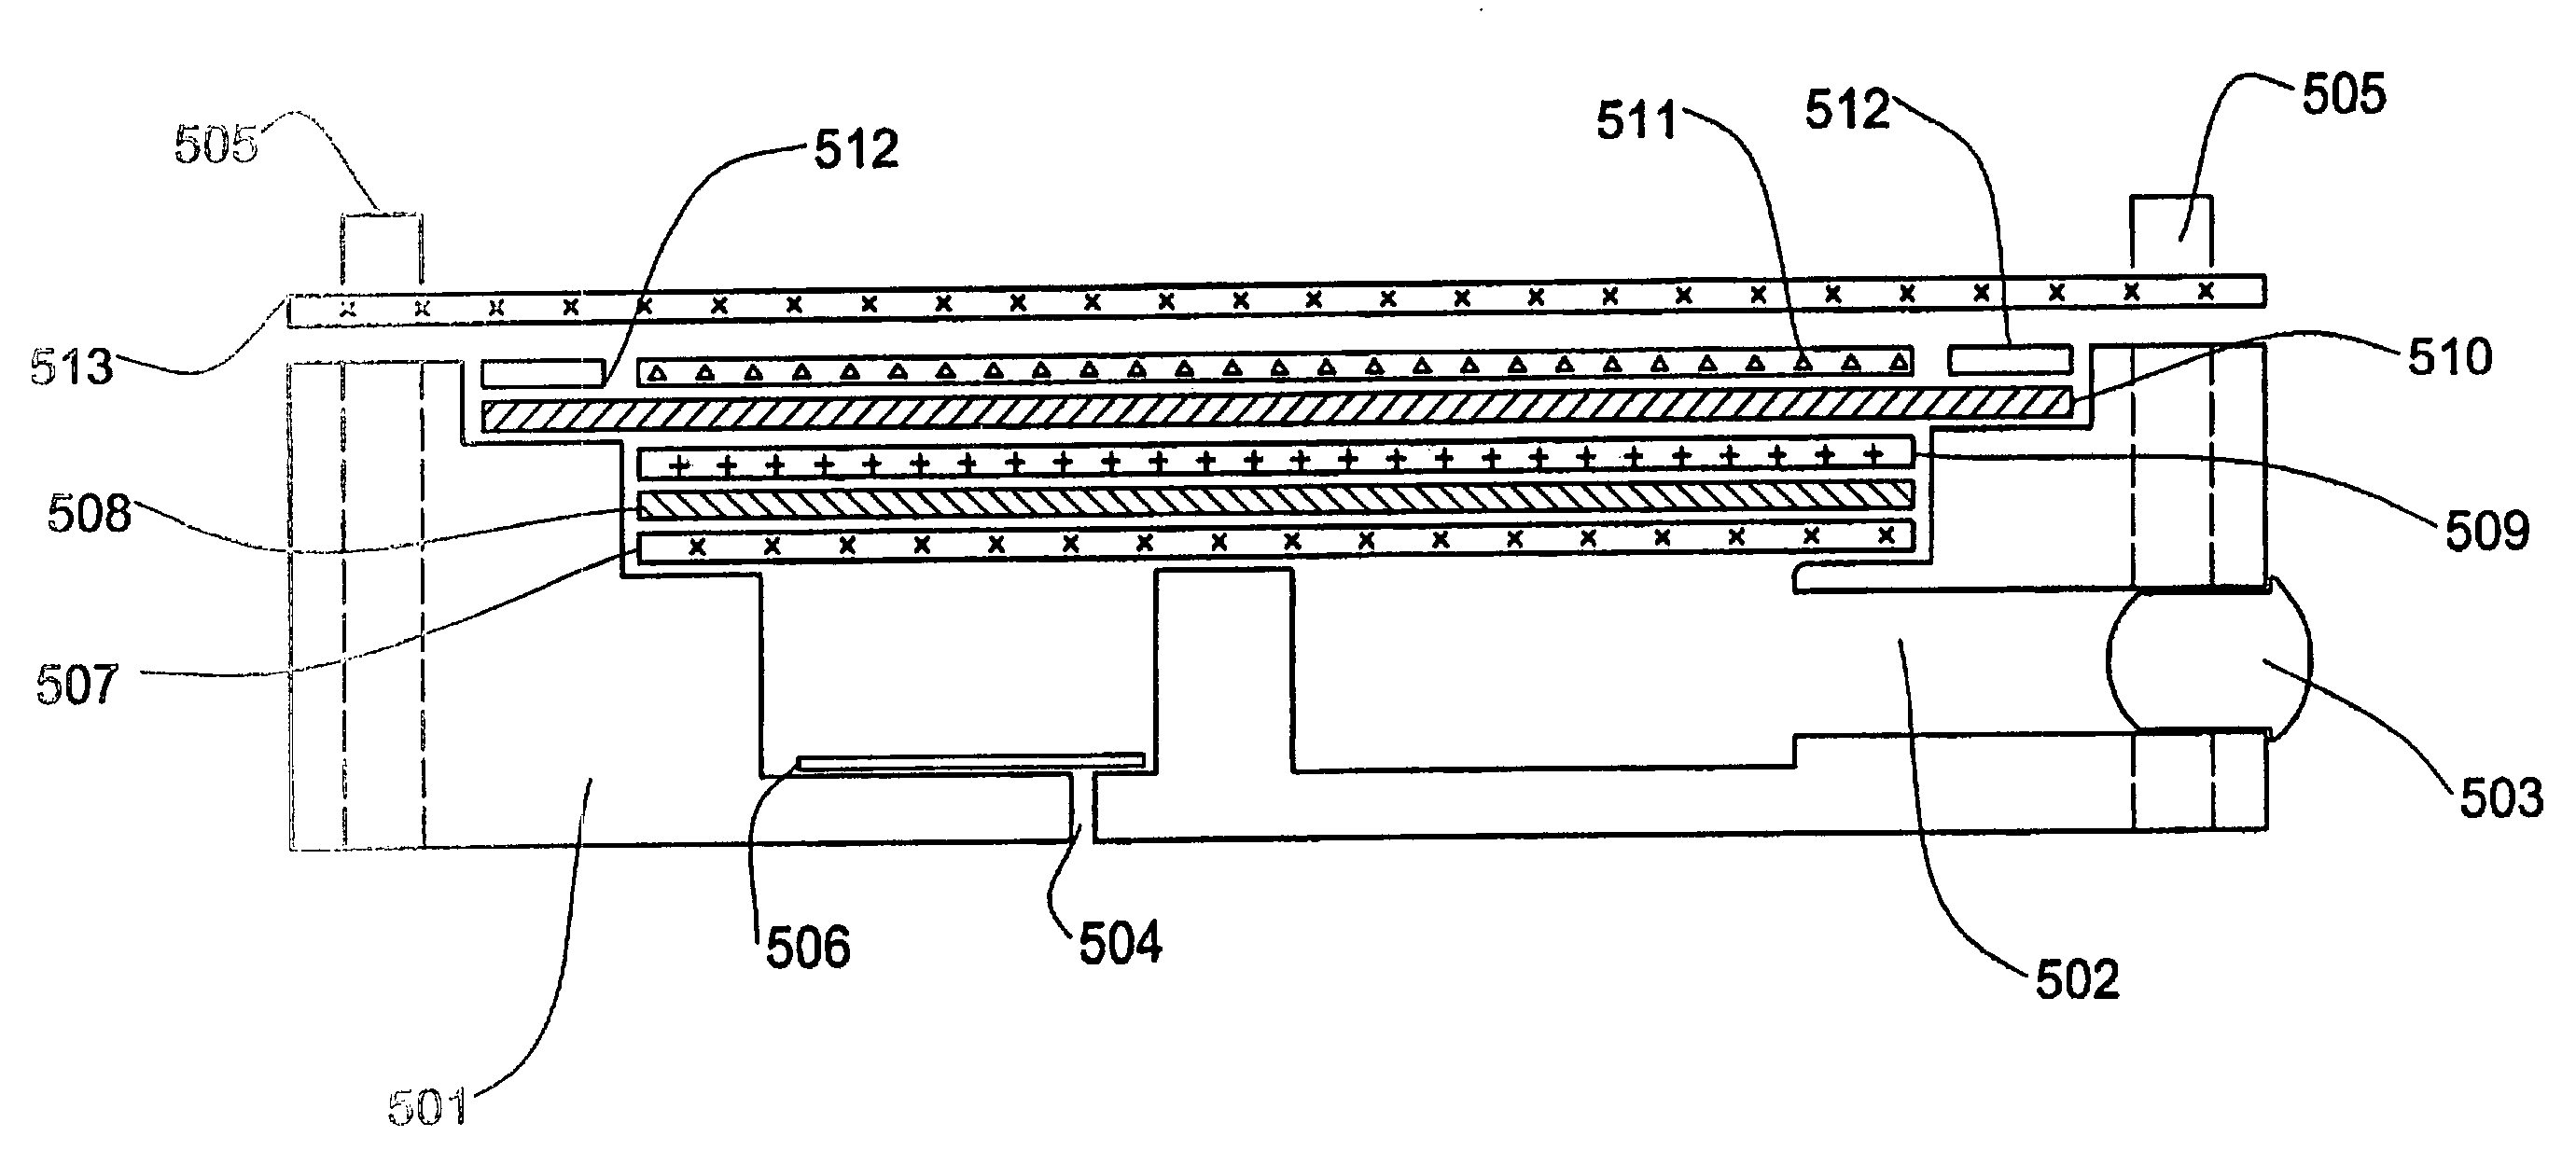 Direct oxidation fuel cell with a divided fuel tank having a movable barrier pressurized by anode effluent gas